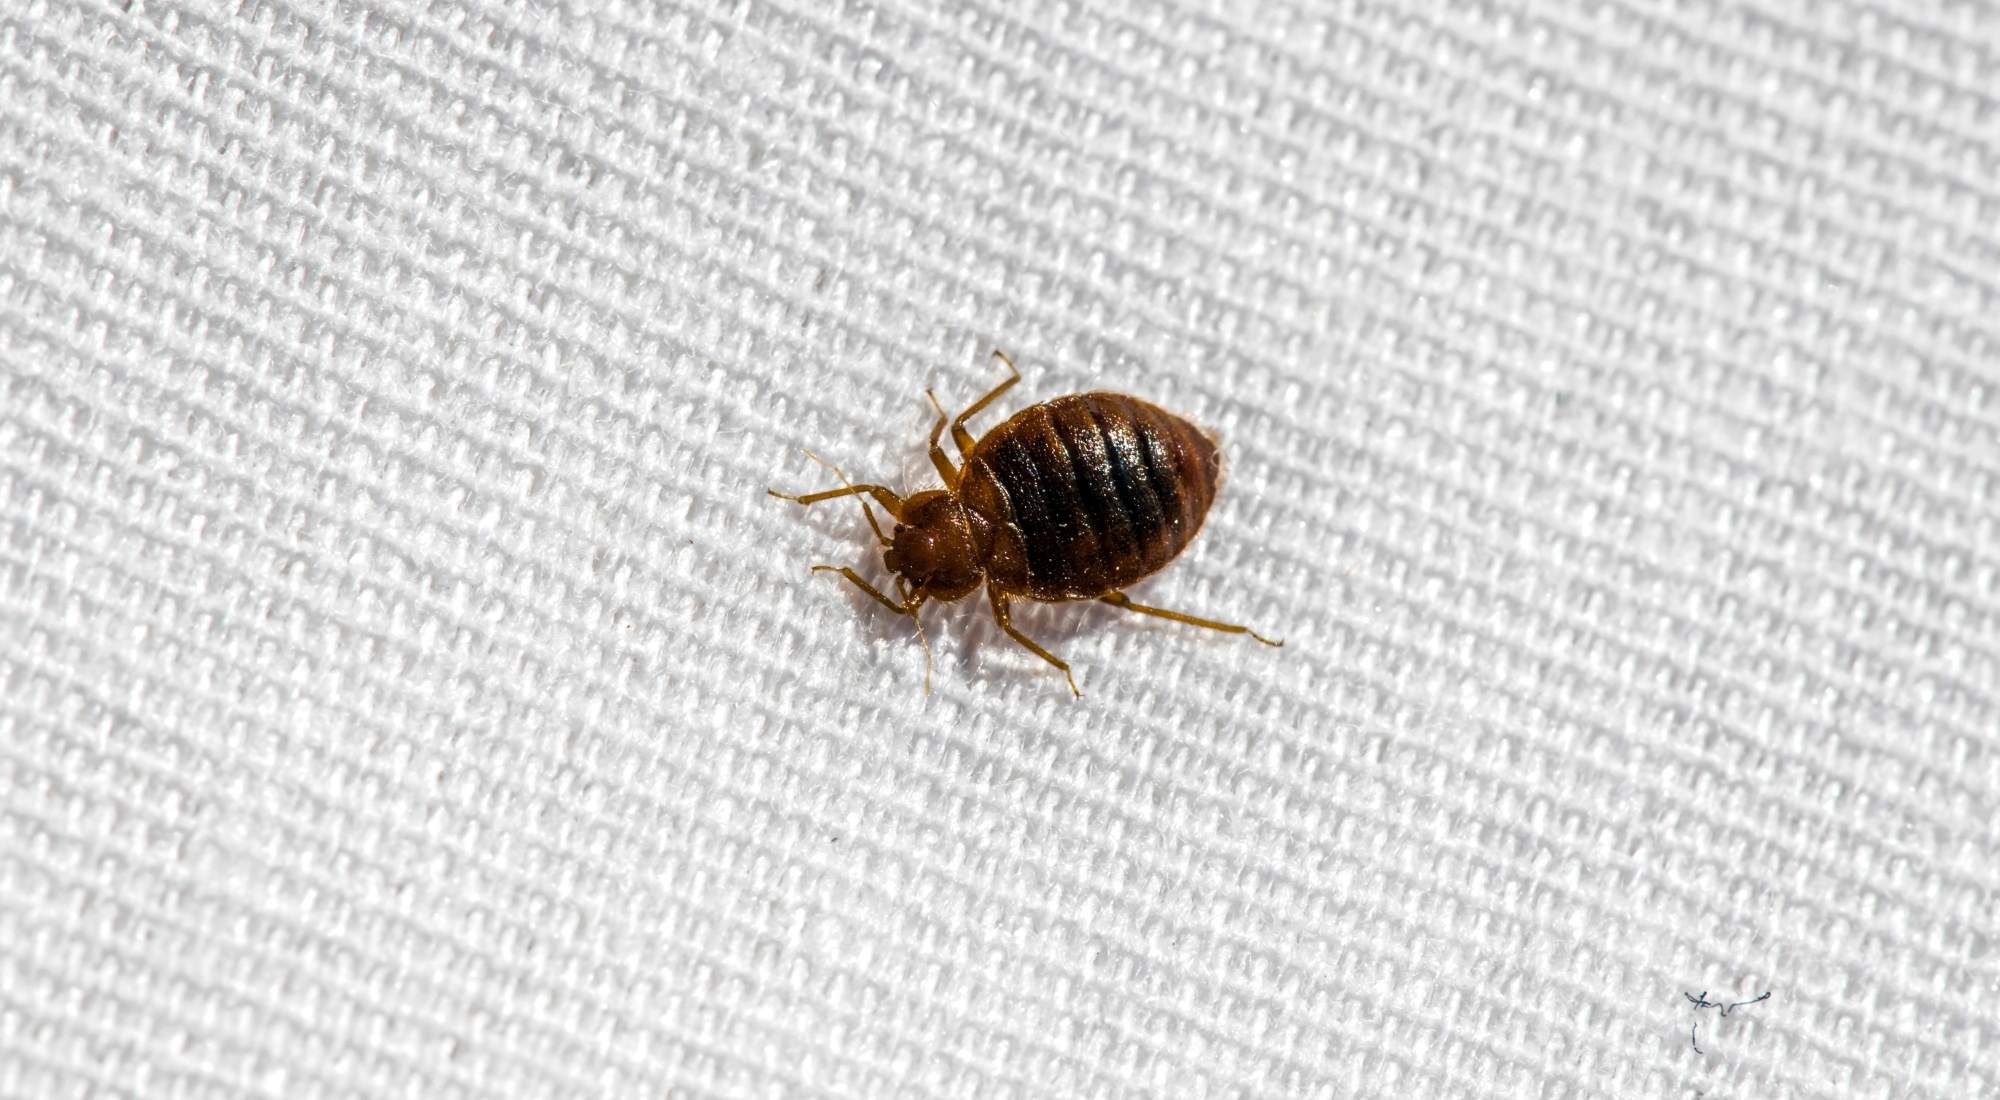 how do you draw bed bugs out of hiding